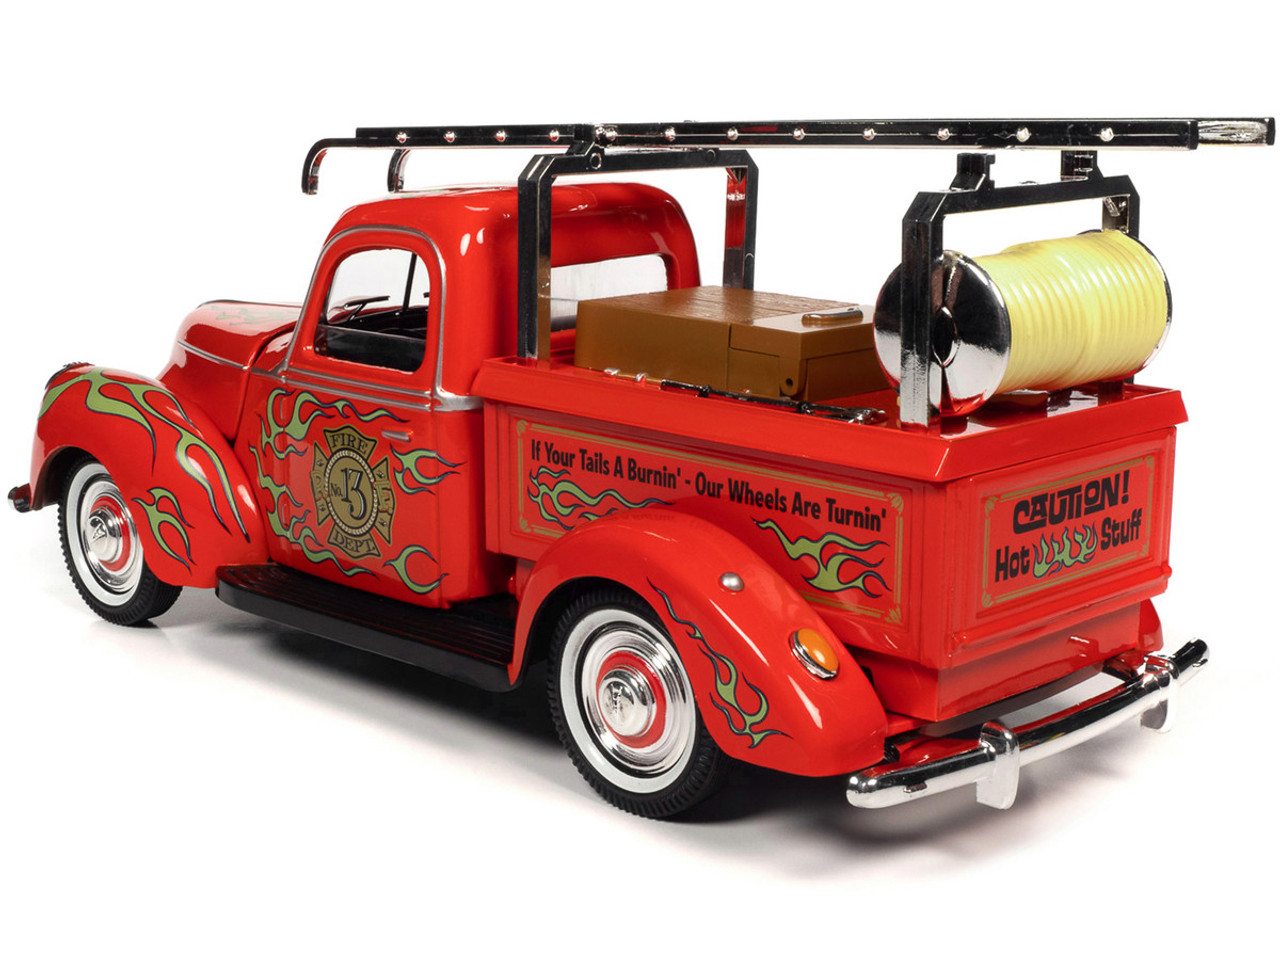 1/18 Auto World "Rat Fink" Fire Engine Truck Red with Graphics and Rat Fink Firefighter Resin Figure Diecast Car Model